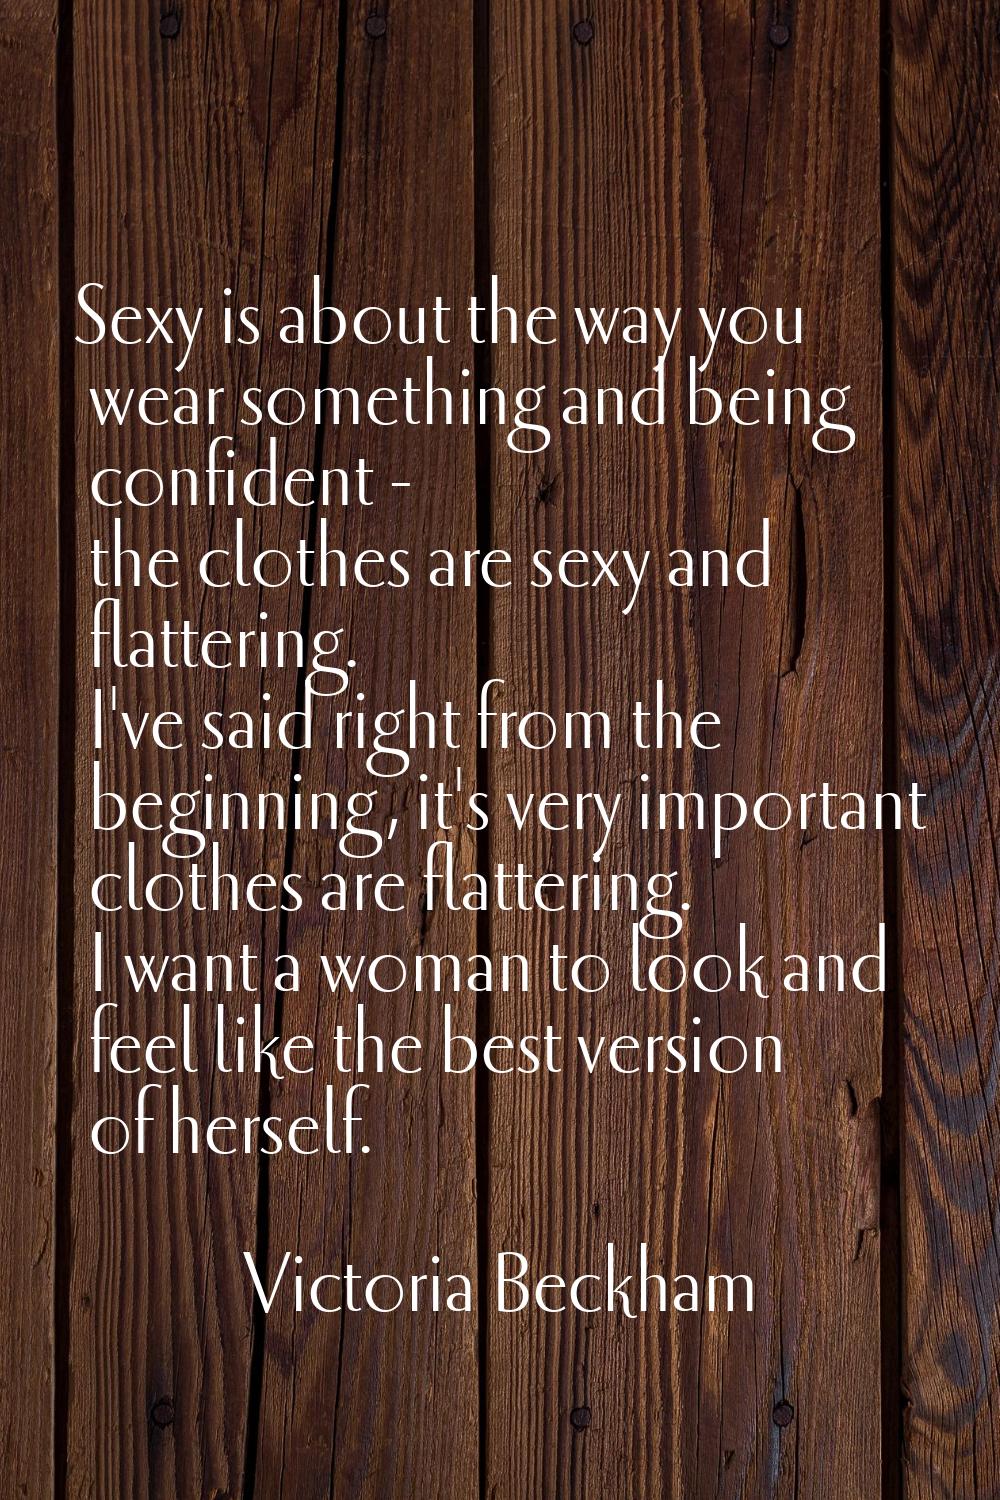 Sexy is about the way you wear something and being confident - the clothes are sexy and flattering.